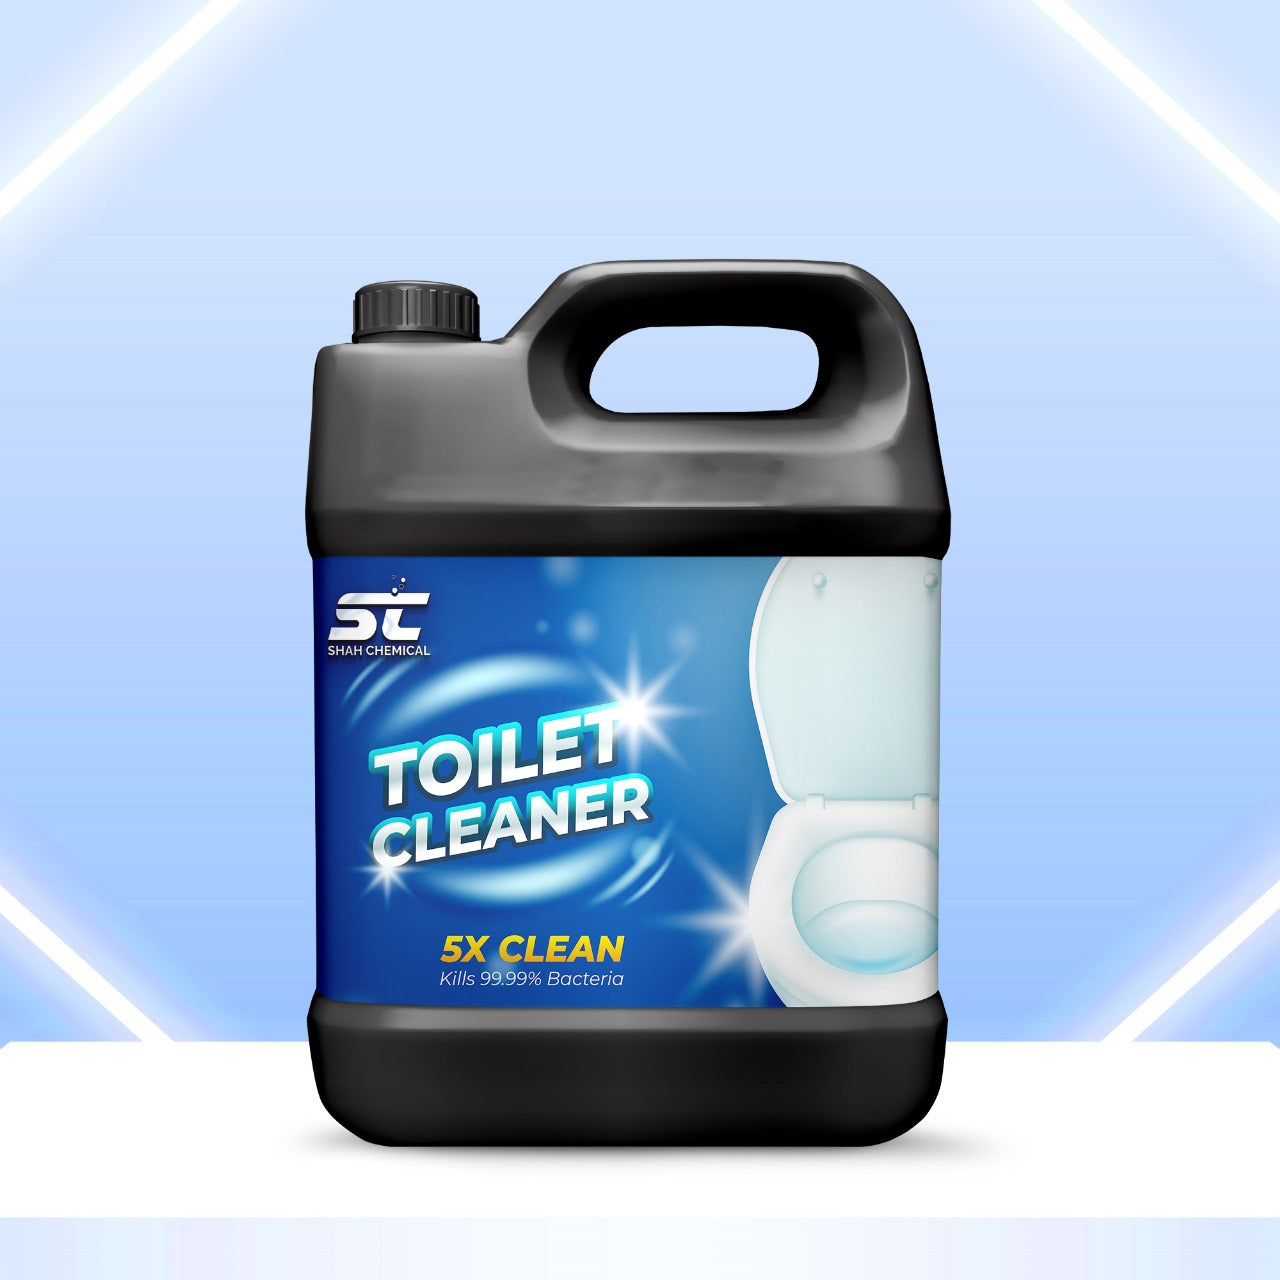 Anti-Bacterial Toilet Cleaner Cool Mint Fragrance - 4 litre